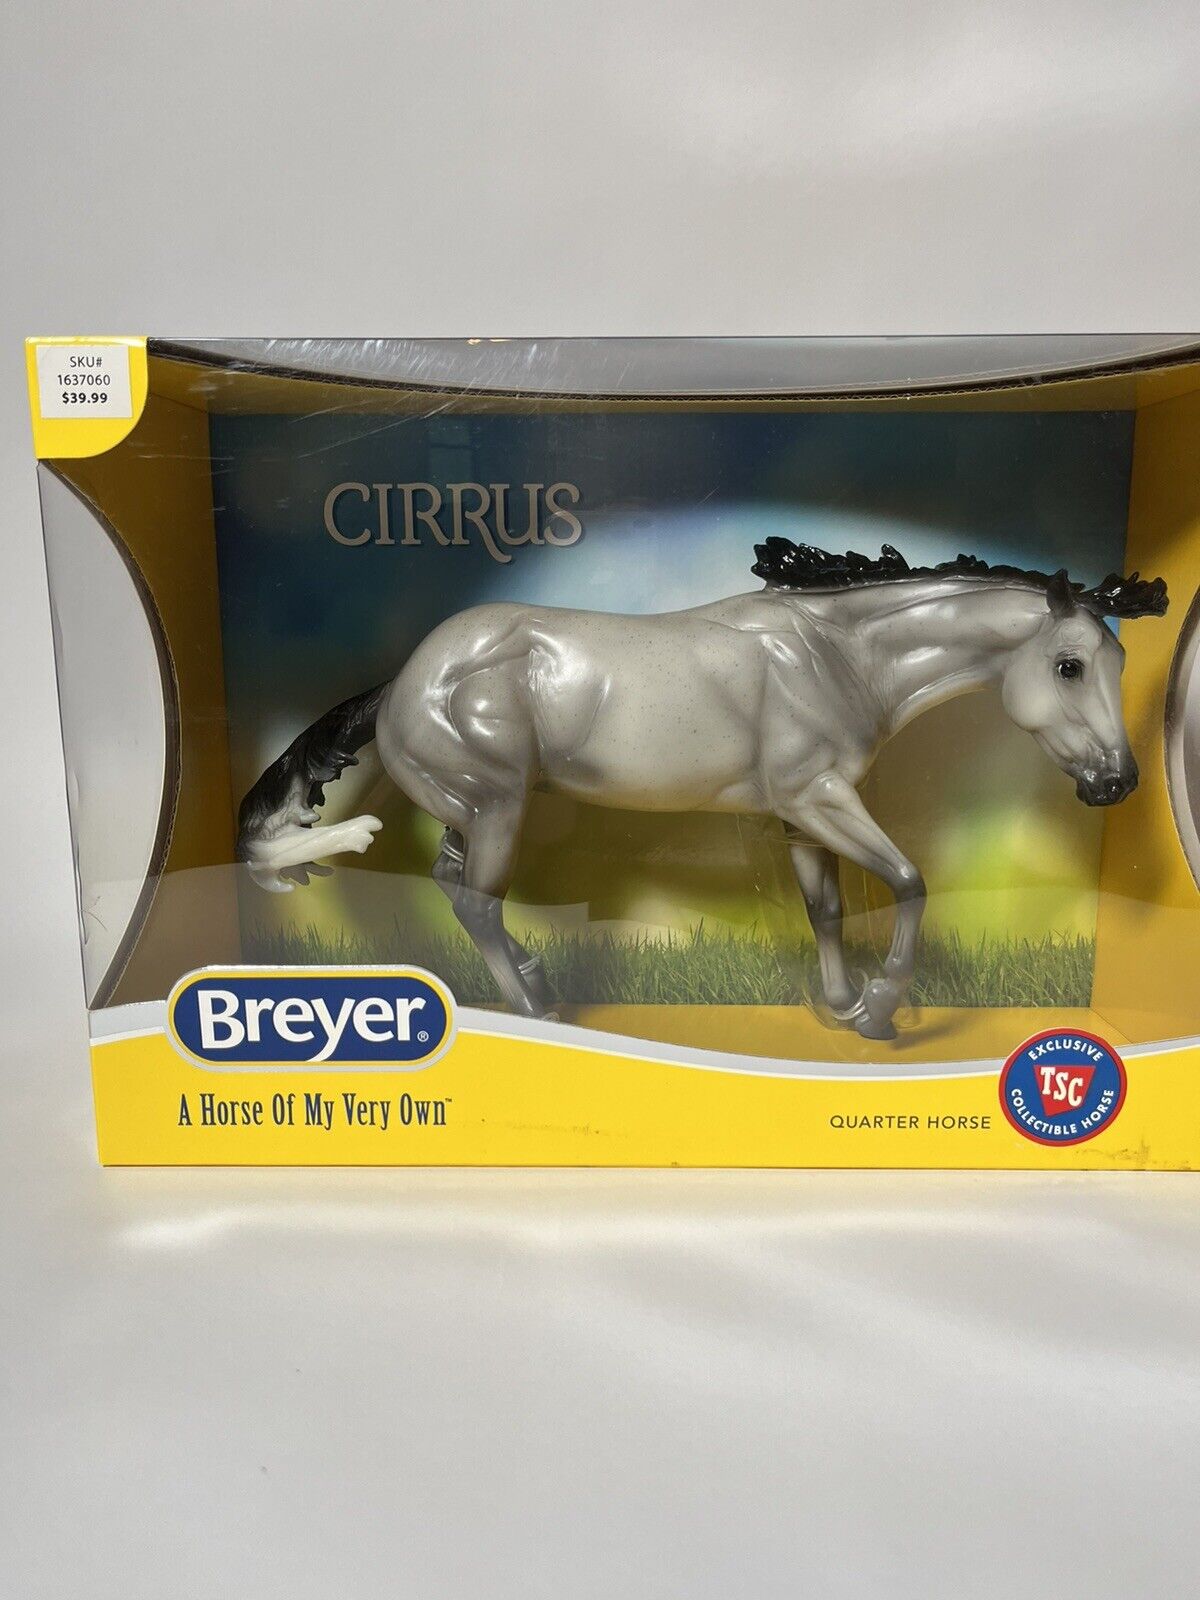 New BREYER CIRRUS Quarter Horse 2021 TSC Tractor Supply EXCLUSIVE Model Limited 